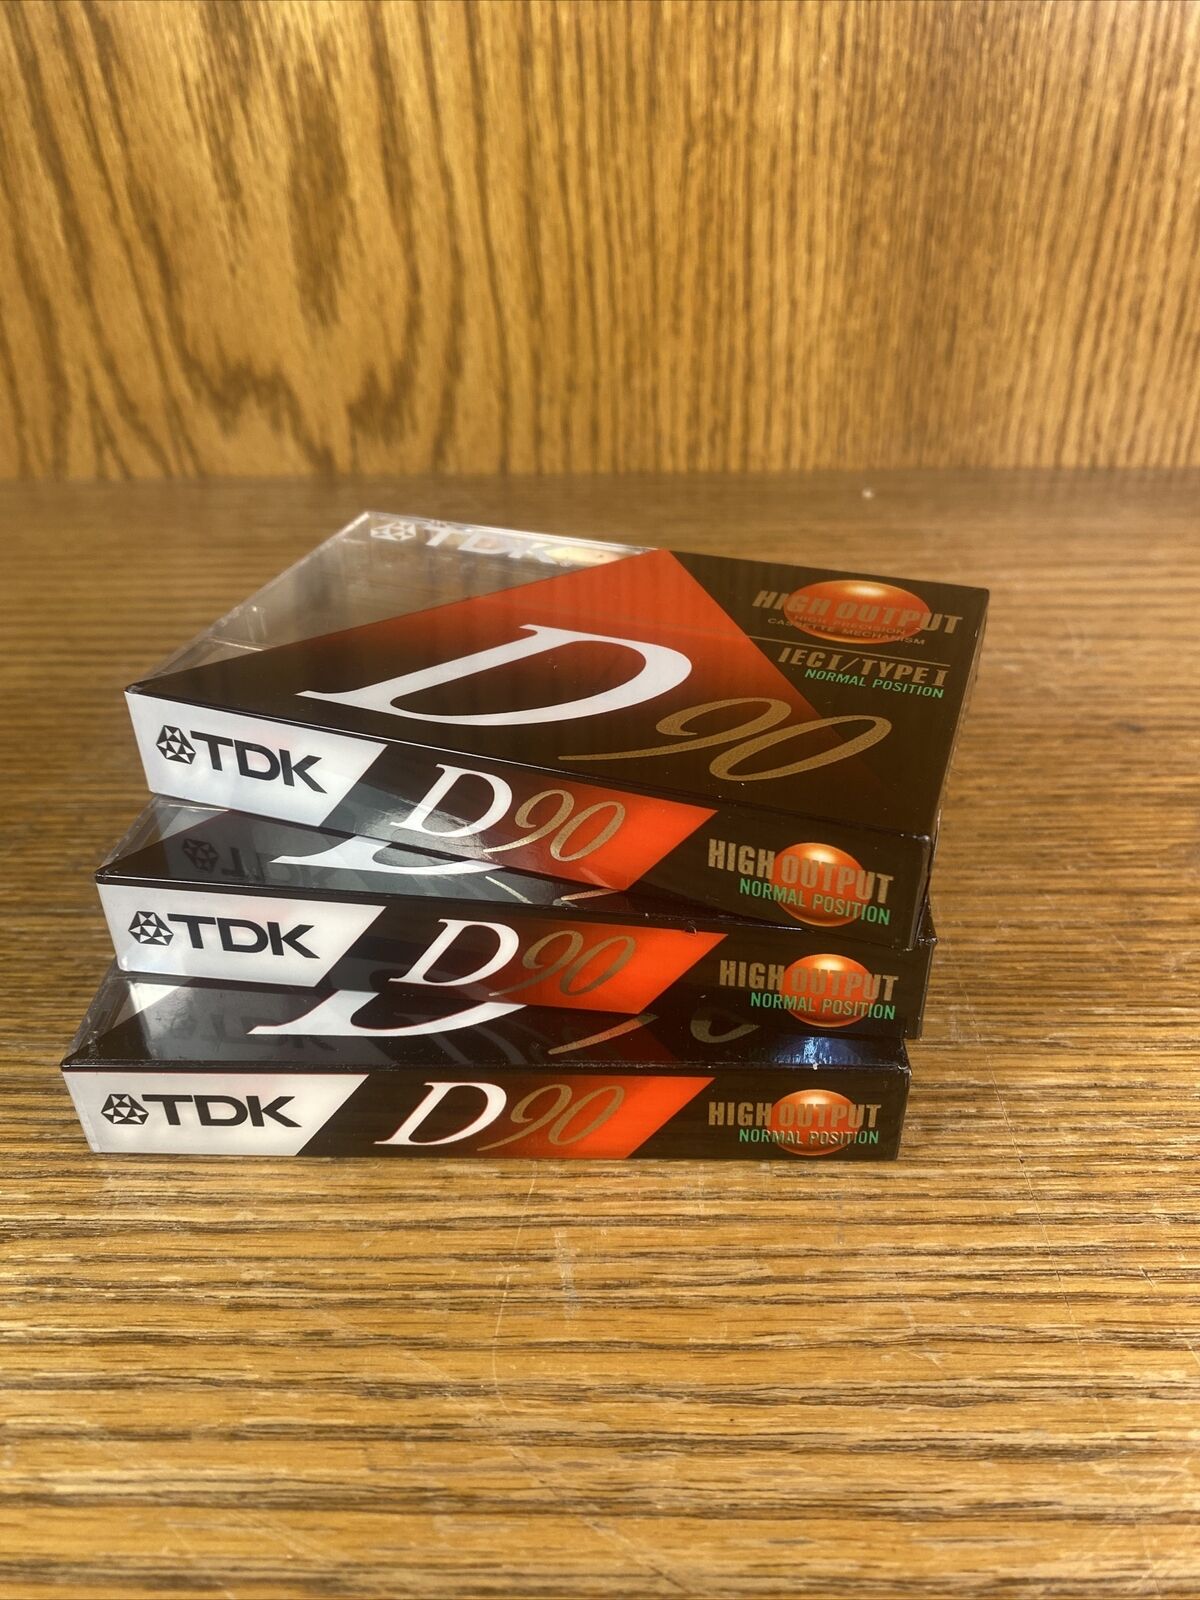 Nos Lot Of 3 Tdk D90 Blank Audio Cassette Tapes 90 Minutes High Output Normal Po